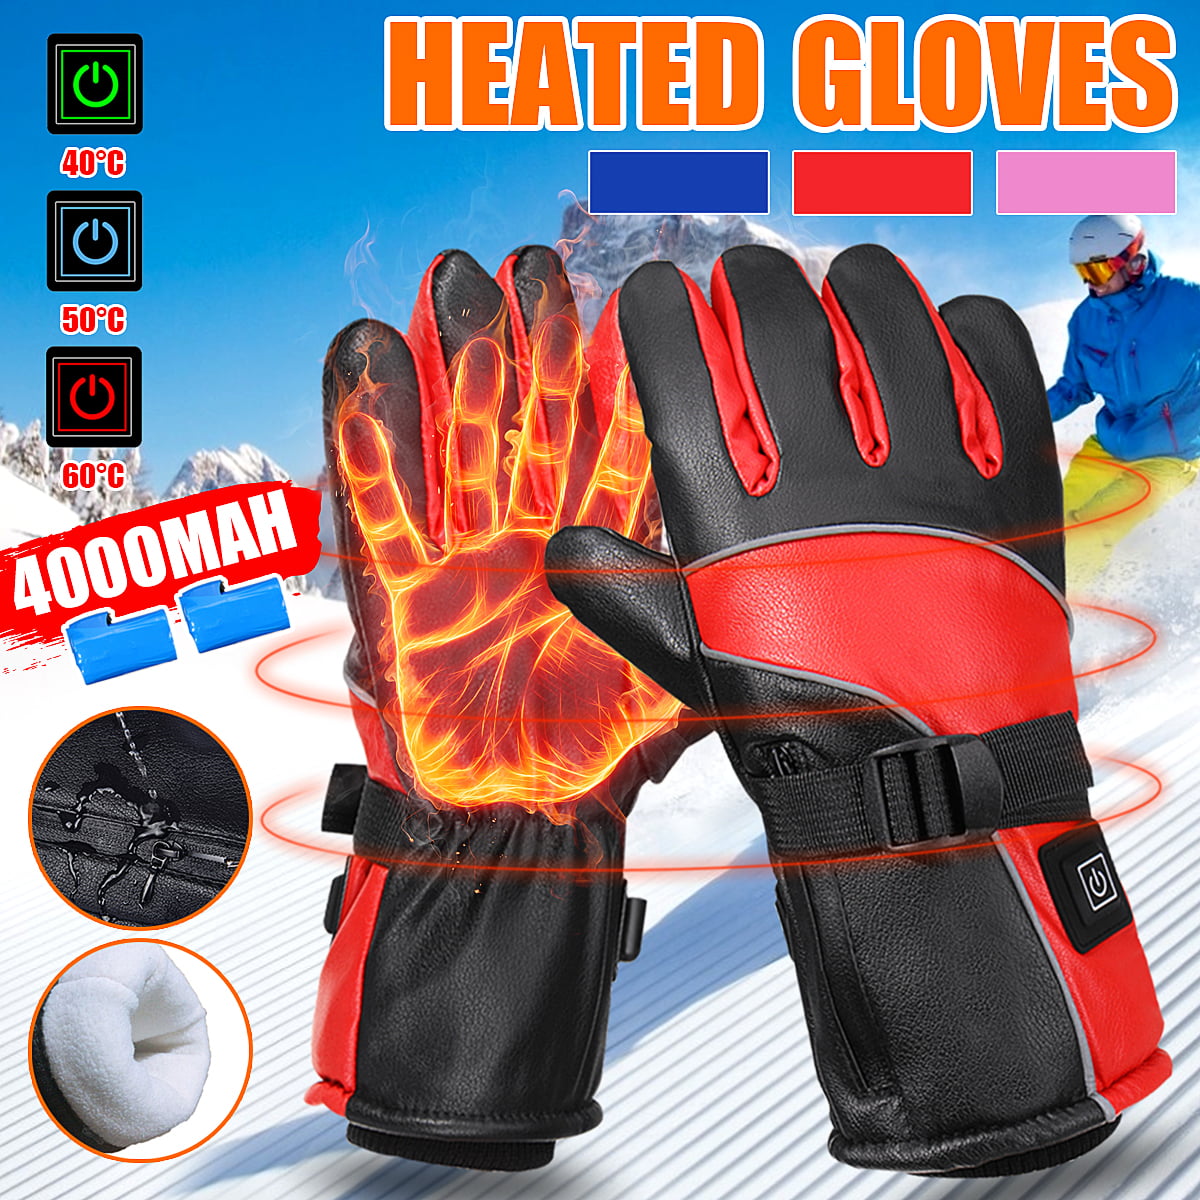 Electric gloves